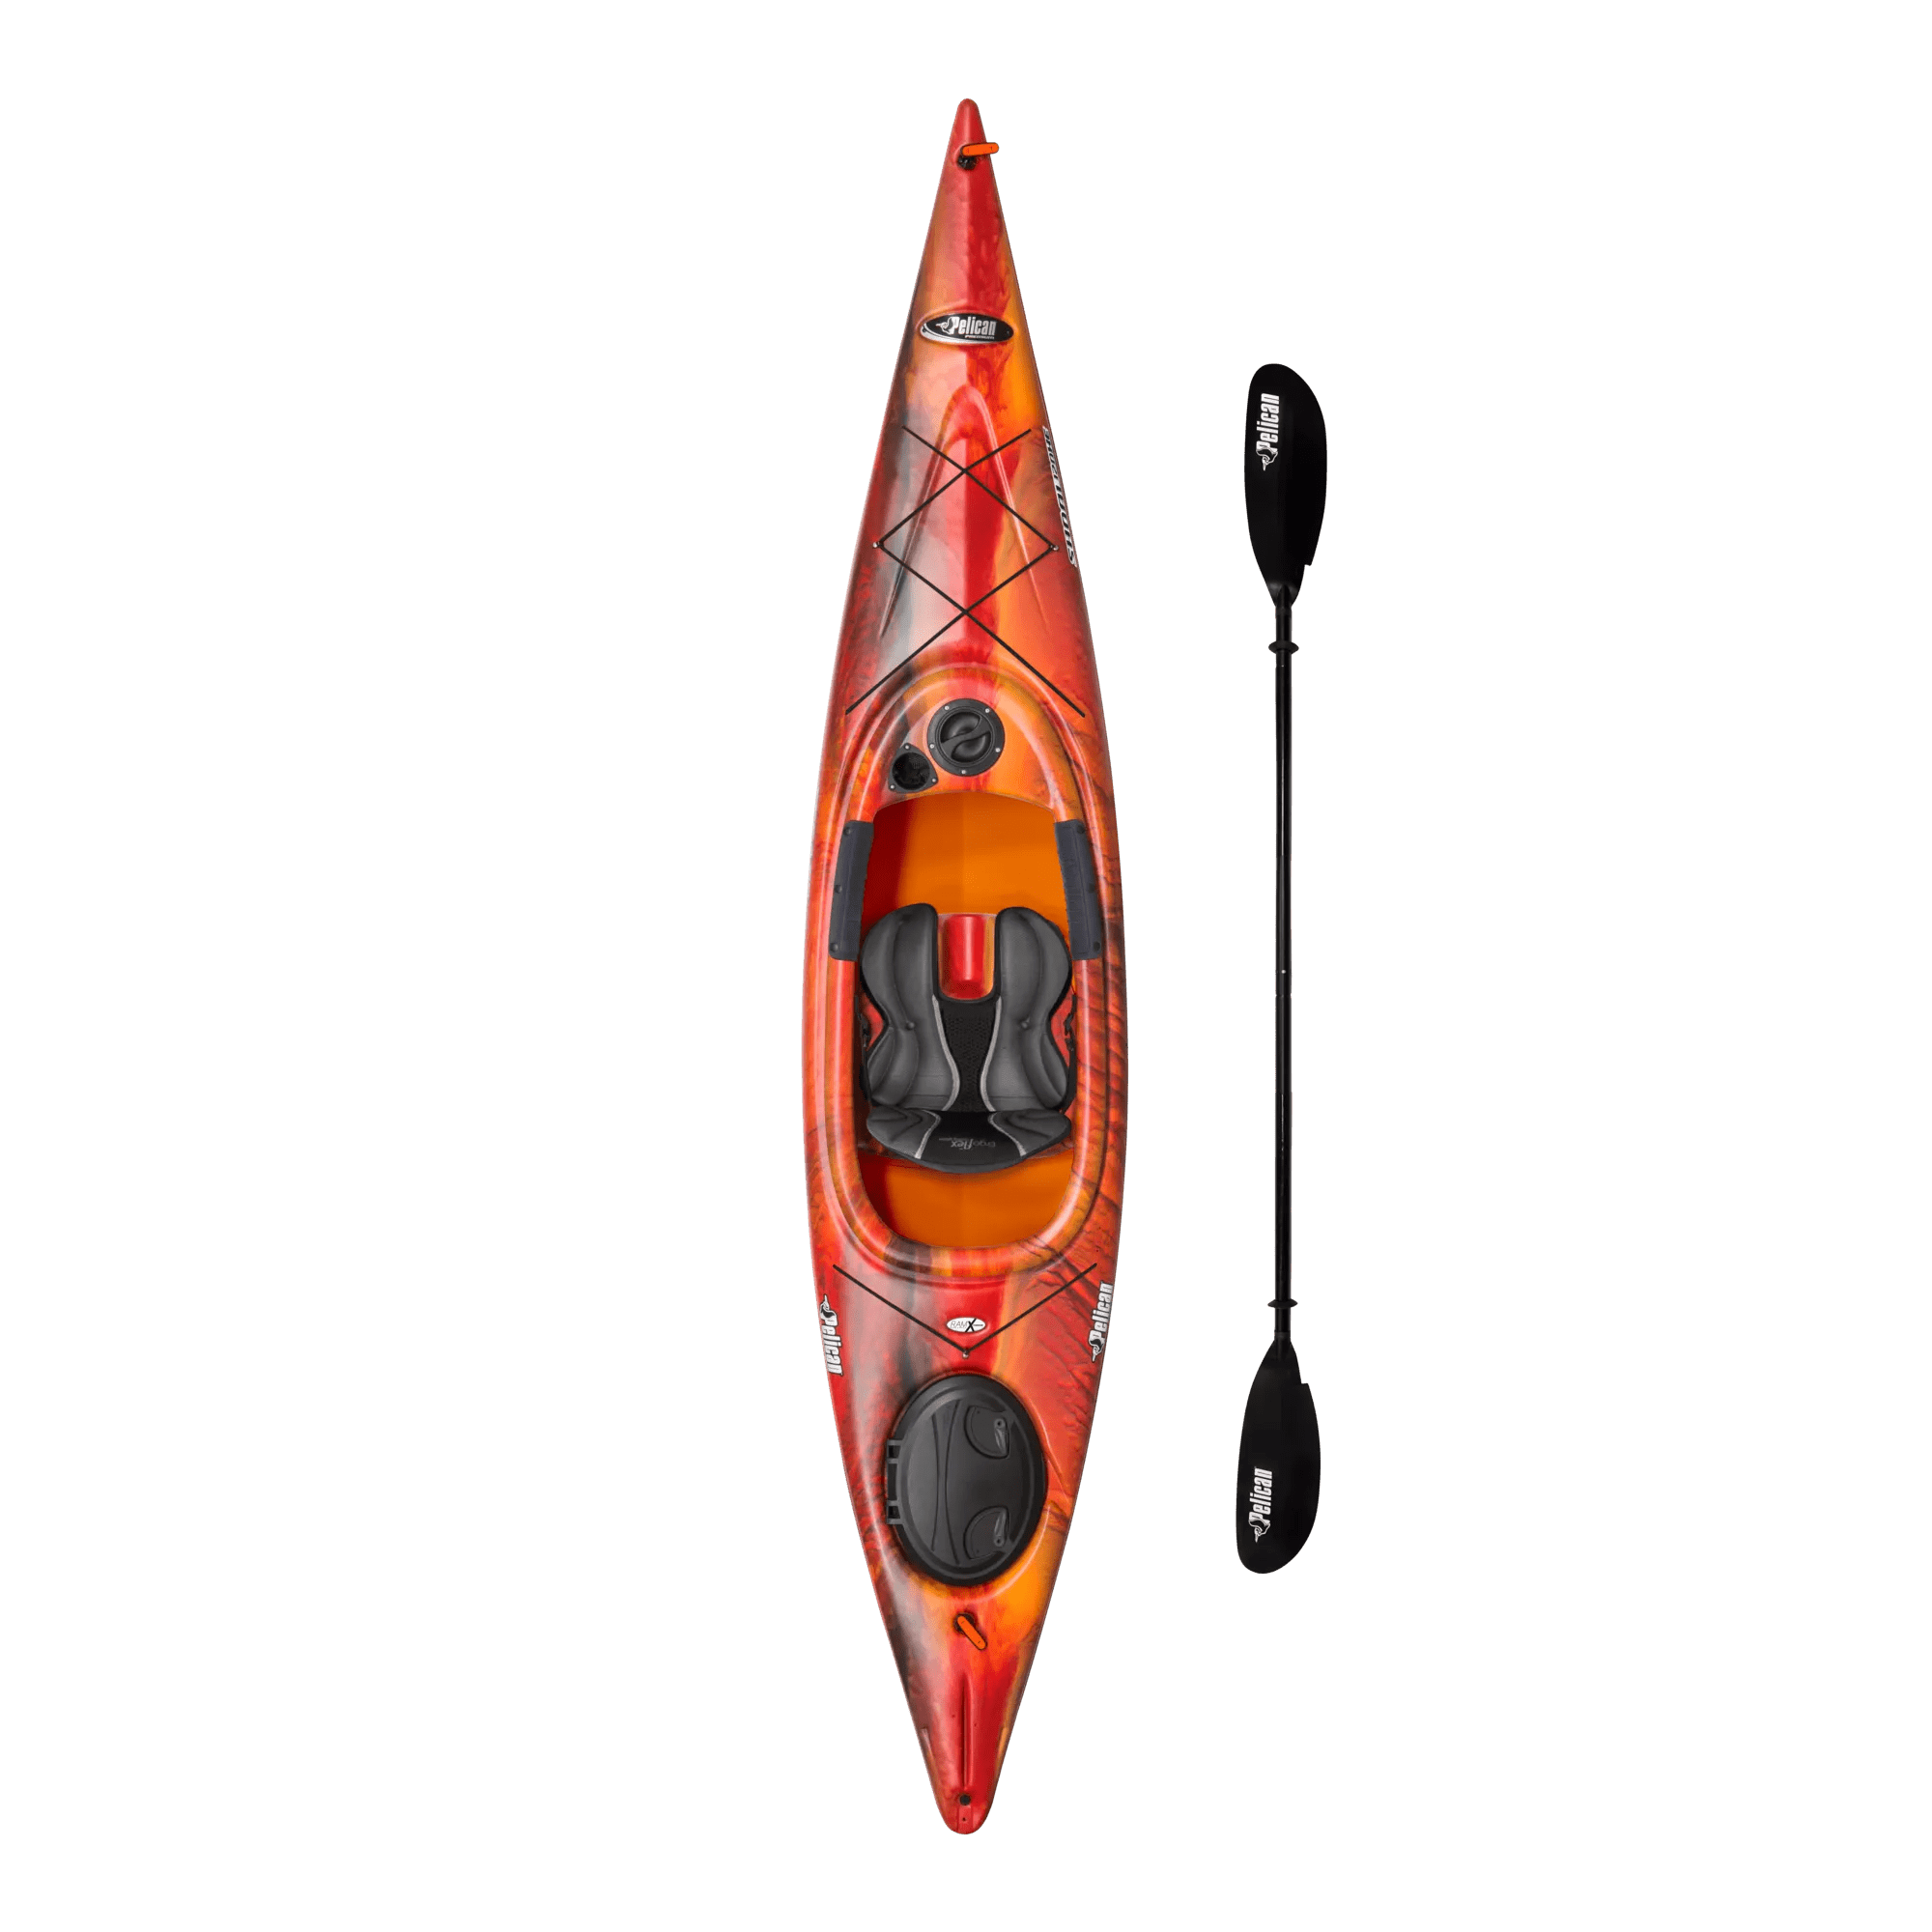 PELICAN - Shoal 120XE Recreational Kayak with paddle - Discontinued color/model - Yellow - KNP12P102-00 - TOP 